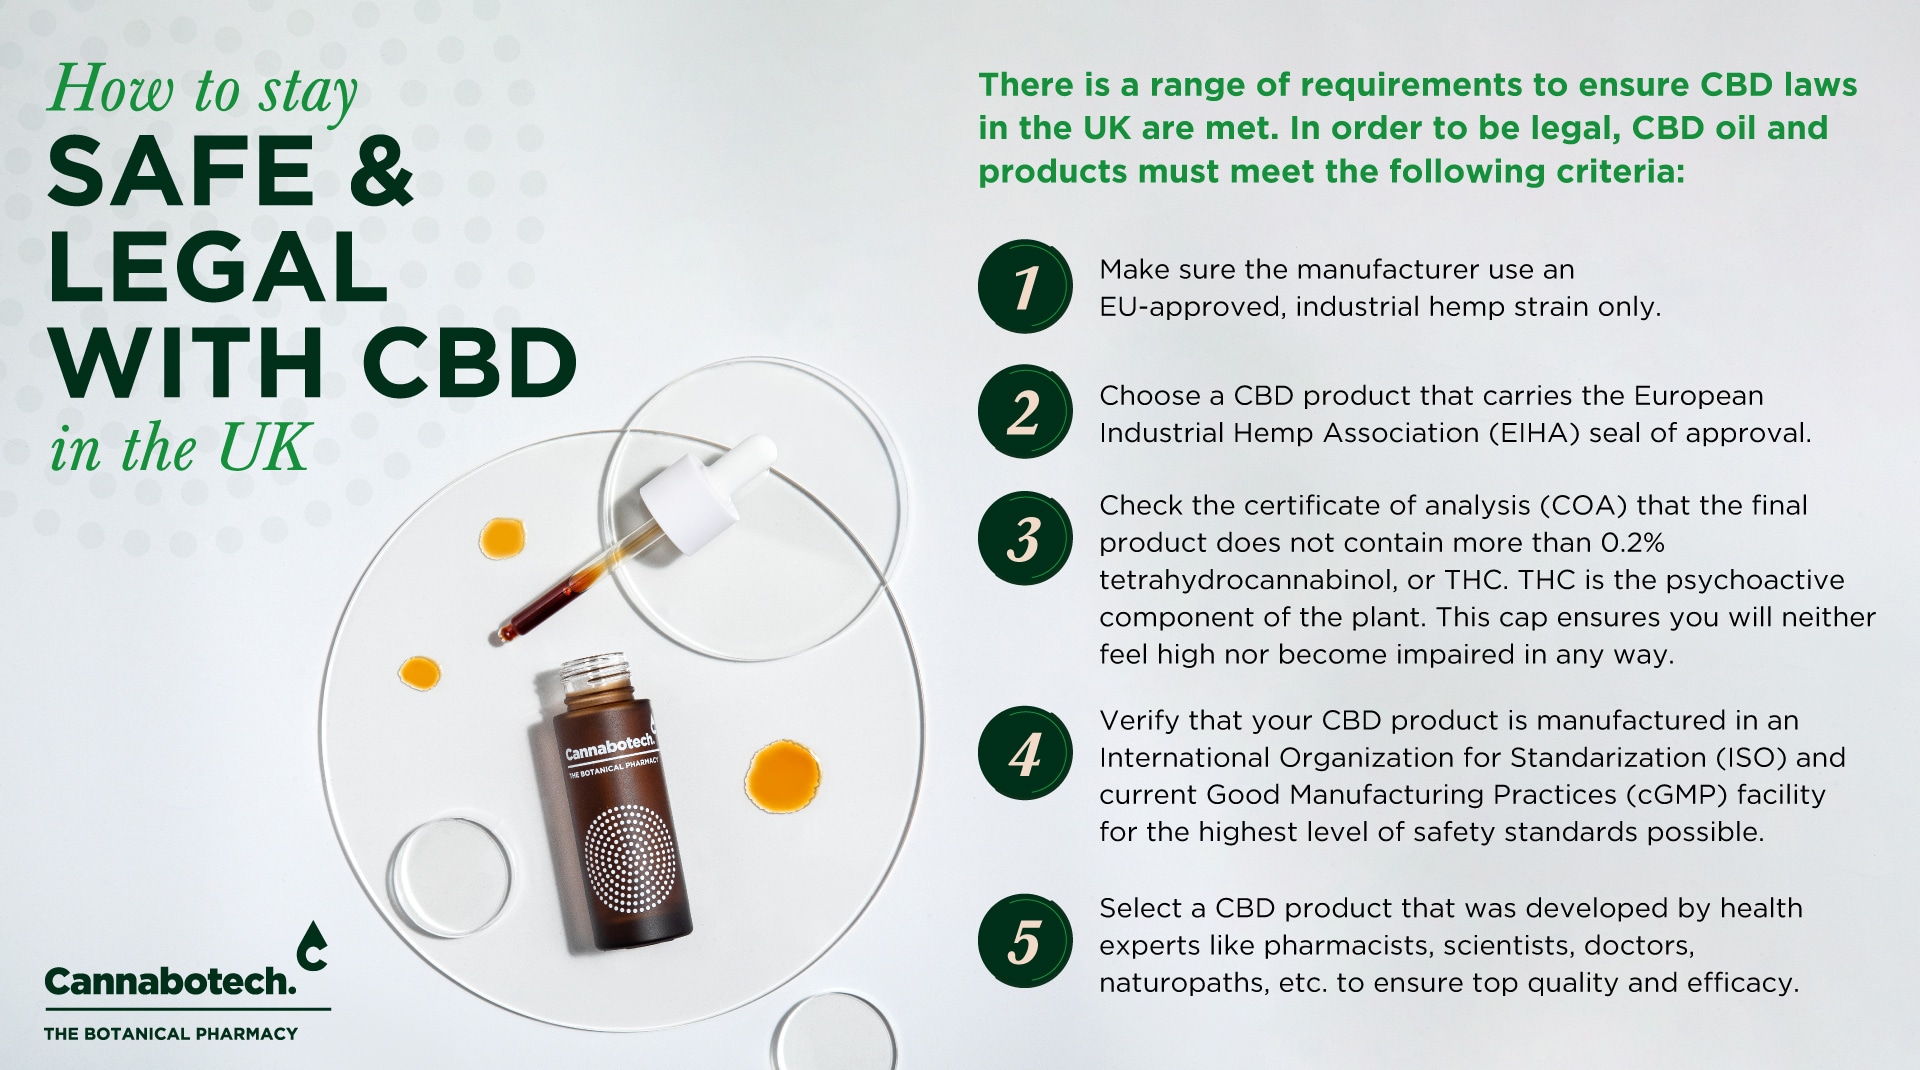 How to stay safe and legal with CBD in the UK?